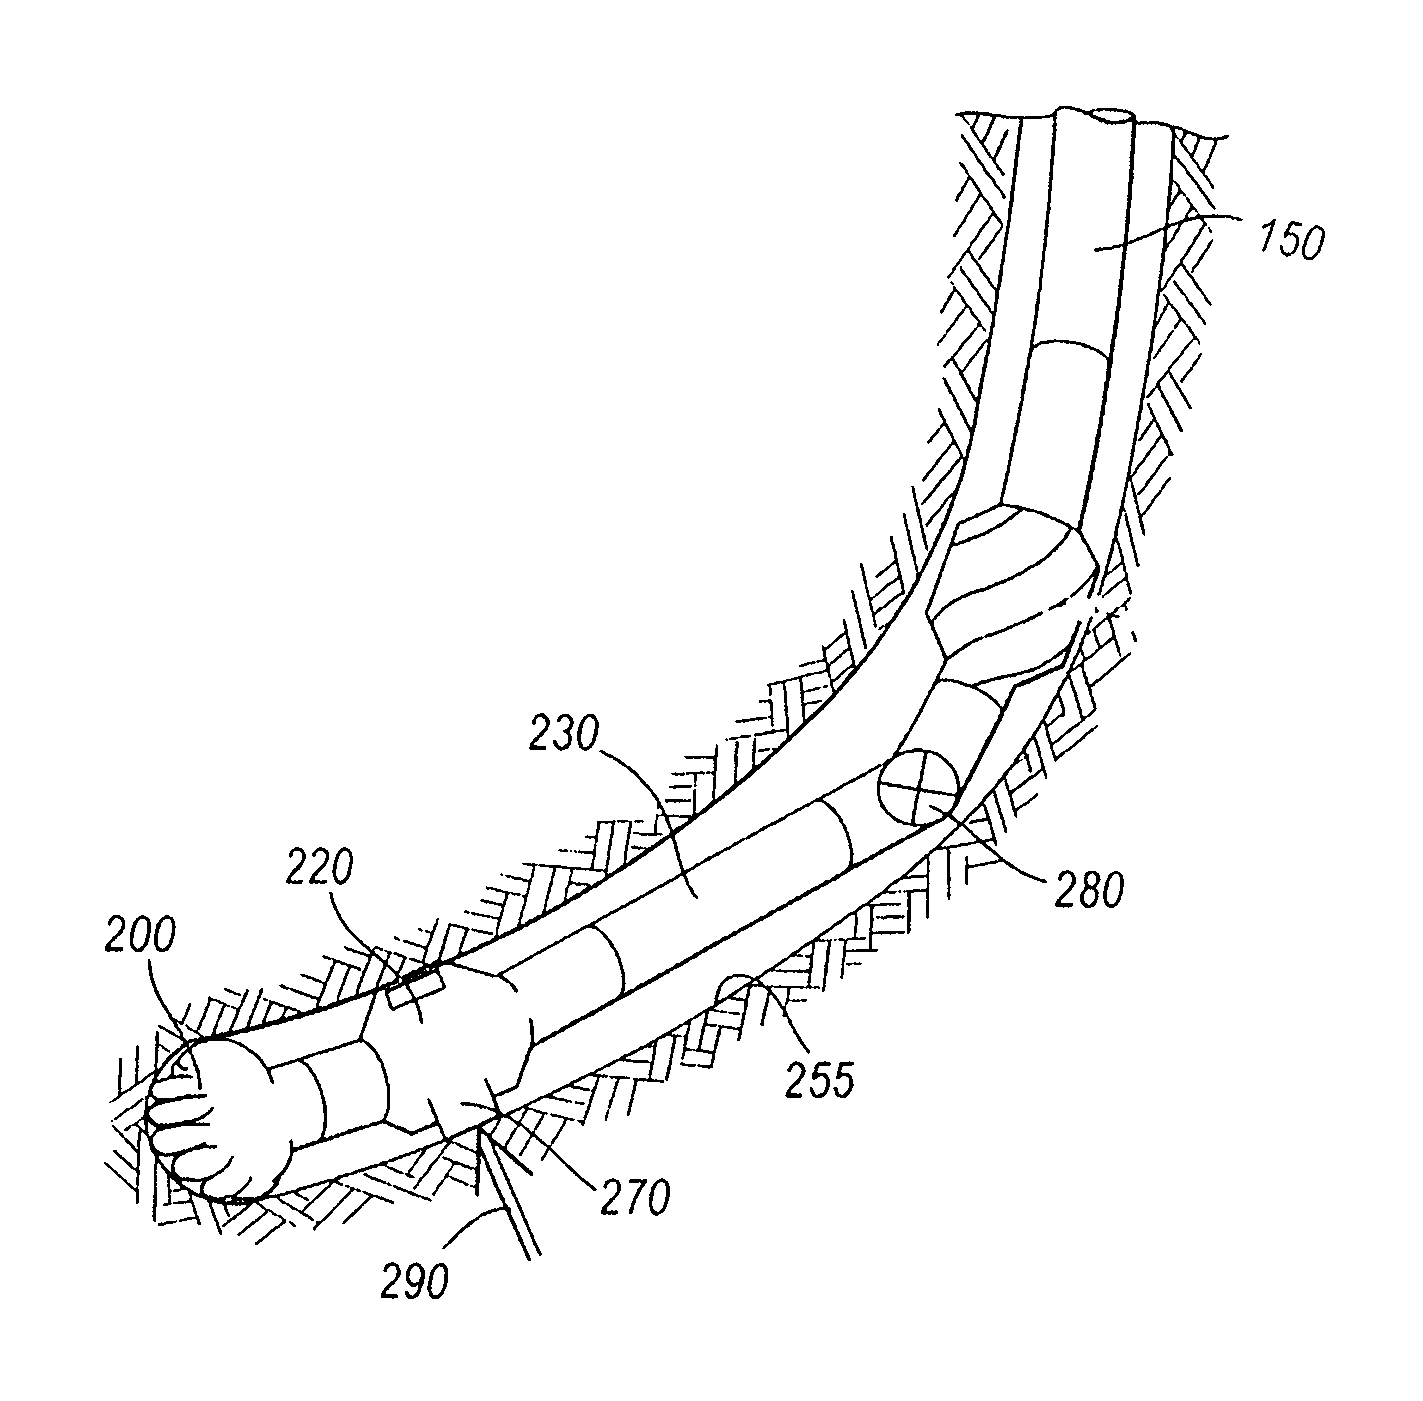 Rotary steerable drilling apparatus and method